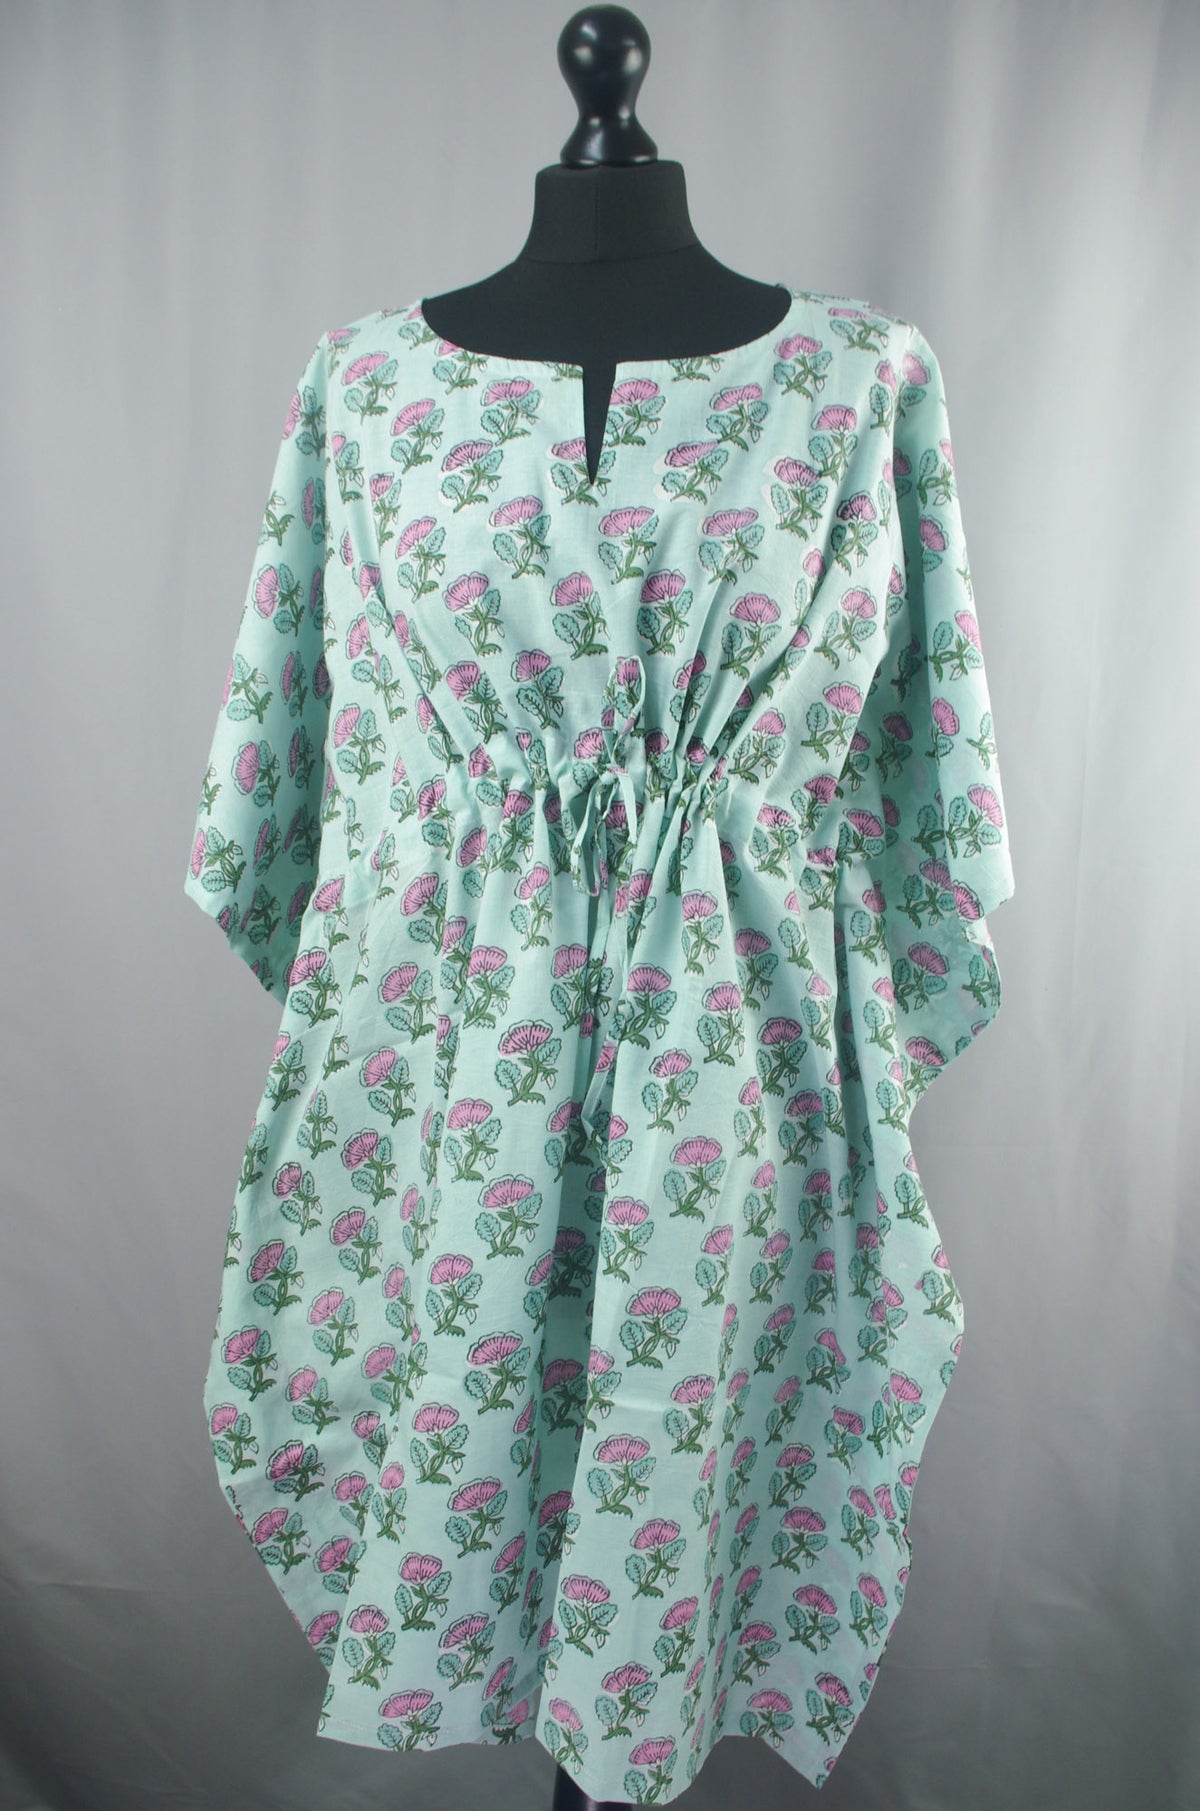 Block Printed Cotton Coverup / Kaftans - Pink Small Floral On Mint